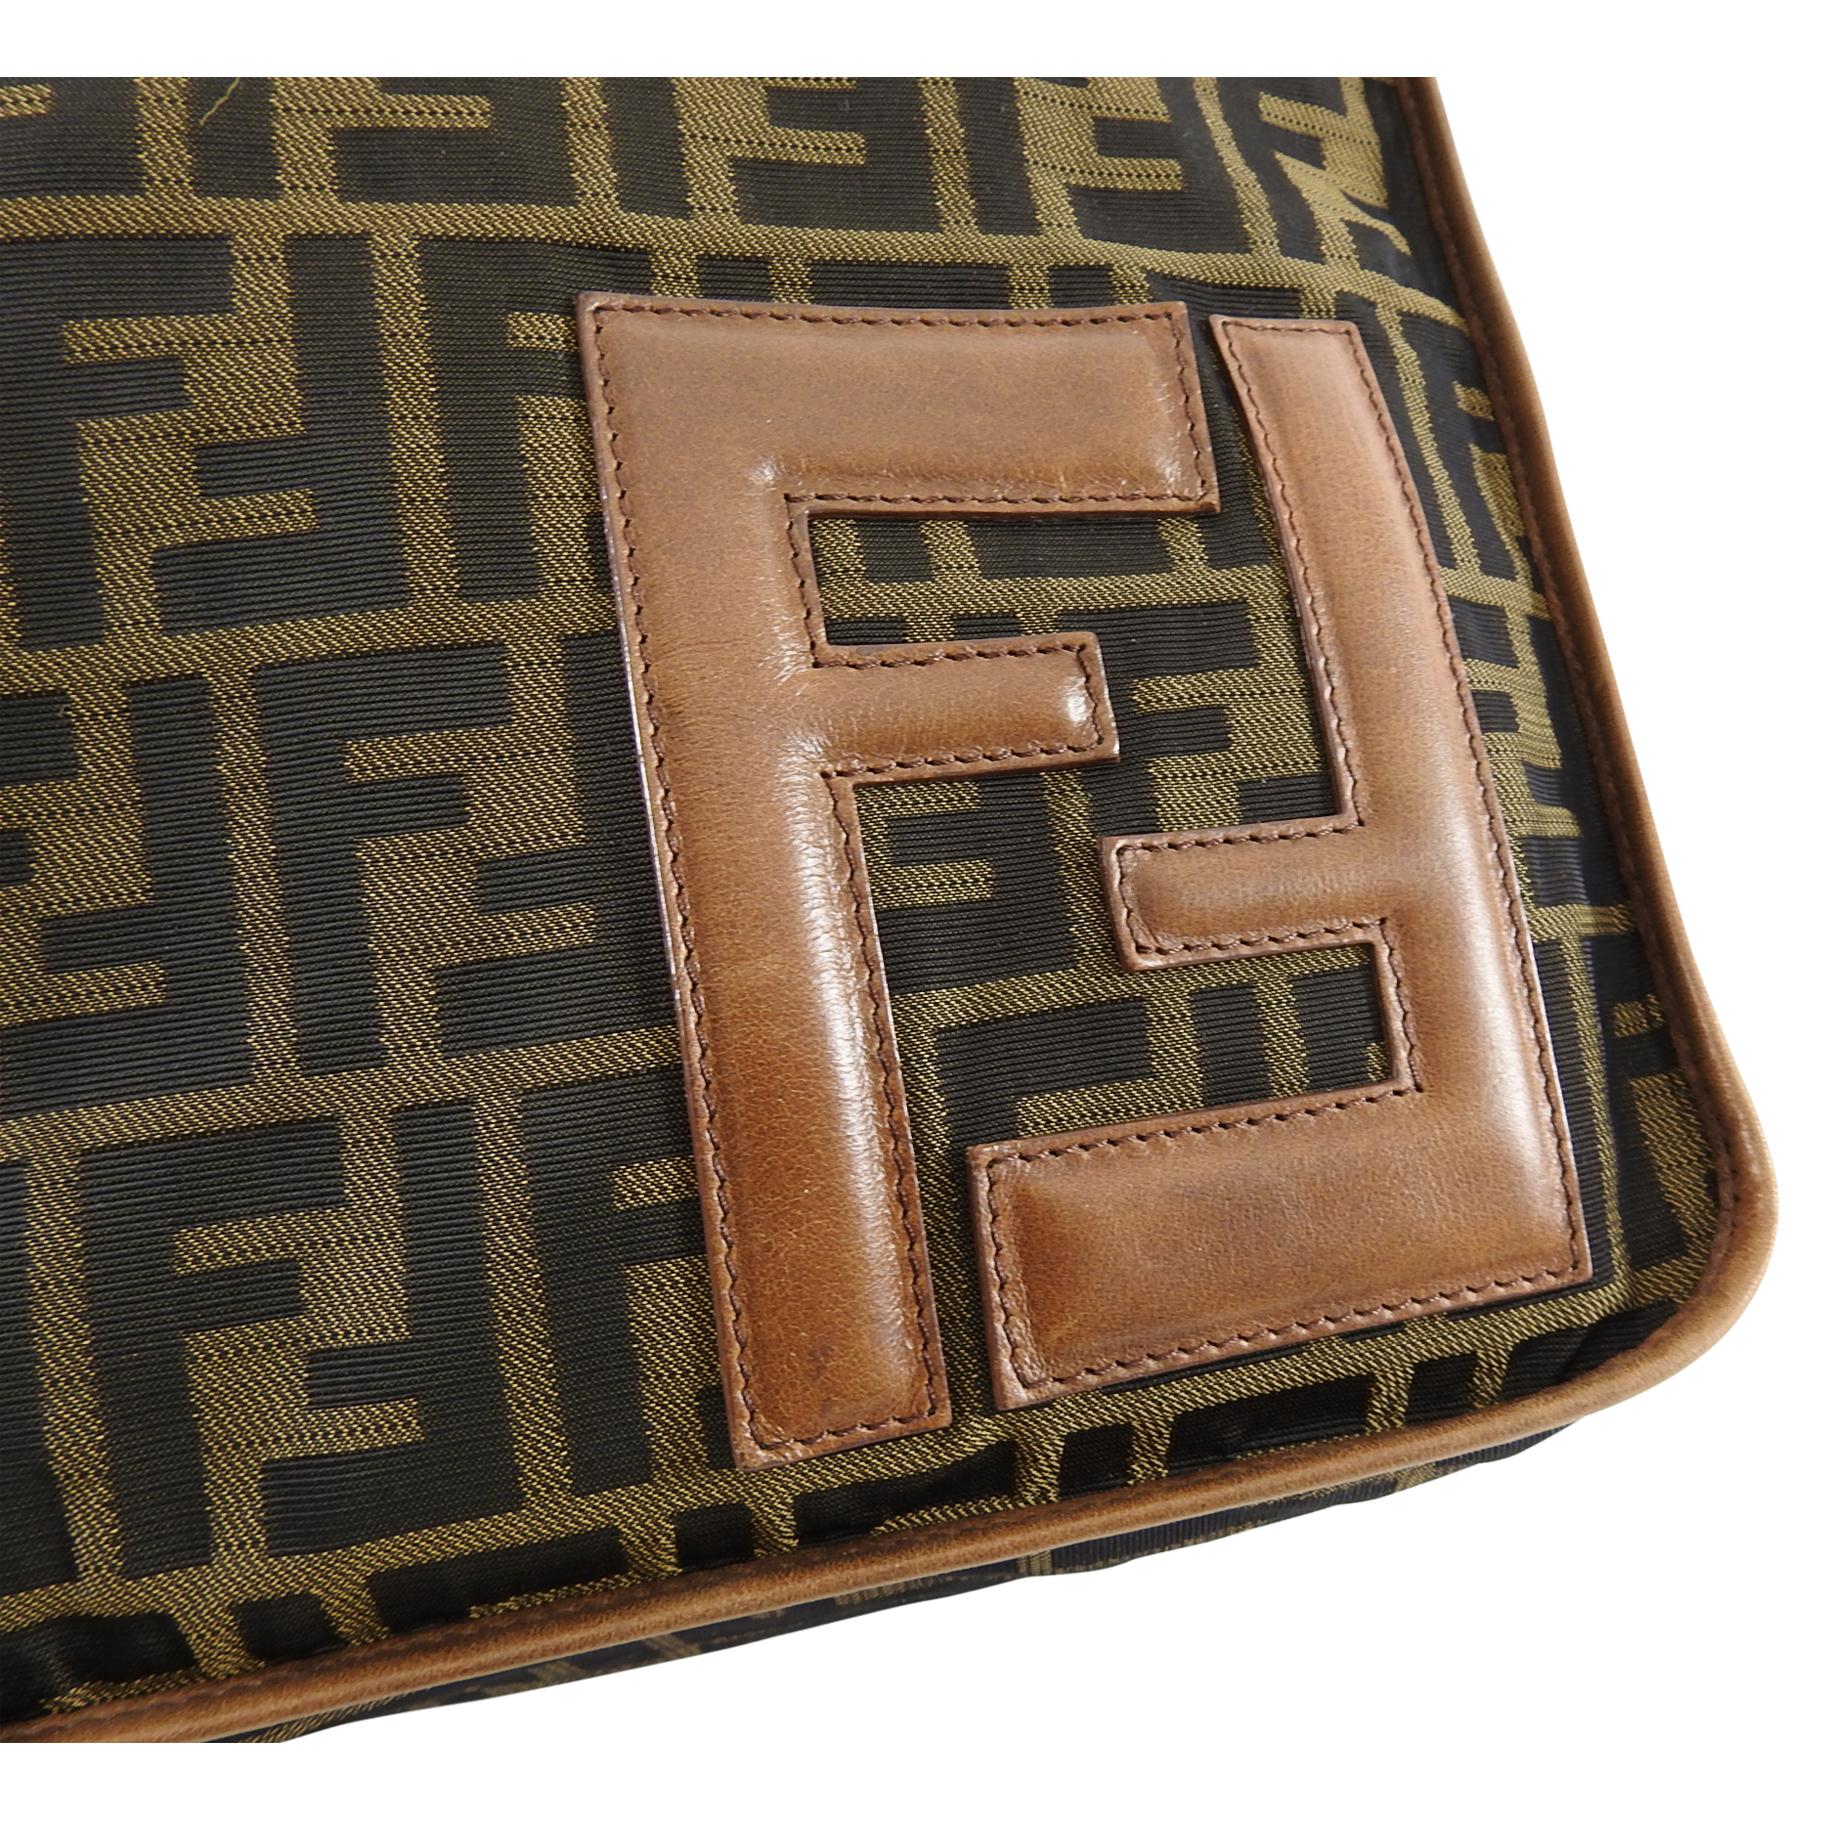 Fendi Vintage FF Zucca Logo Large Crossbody Messenger Bag In Excellent Condition For Sale In Toronto, ON